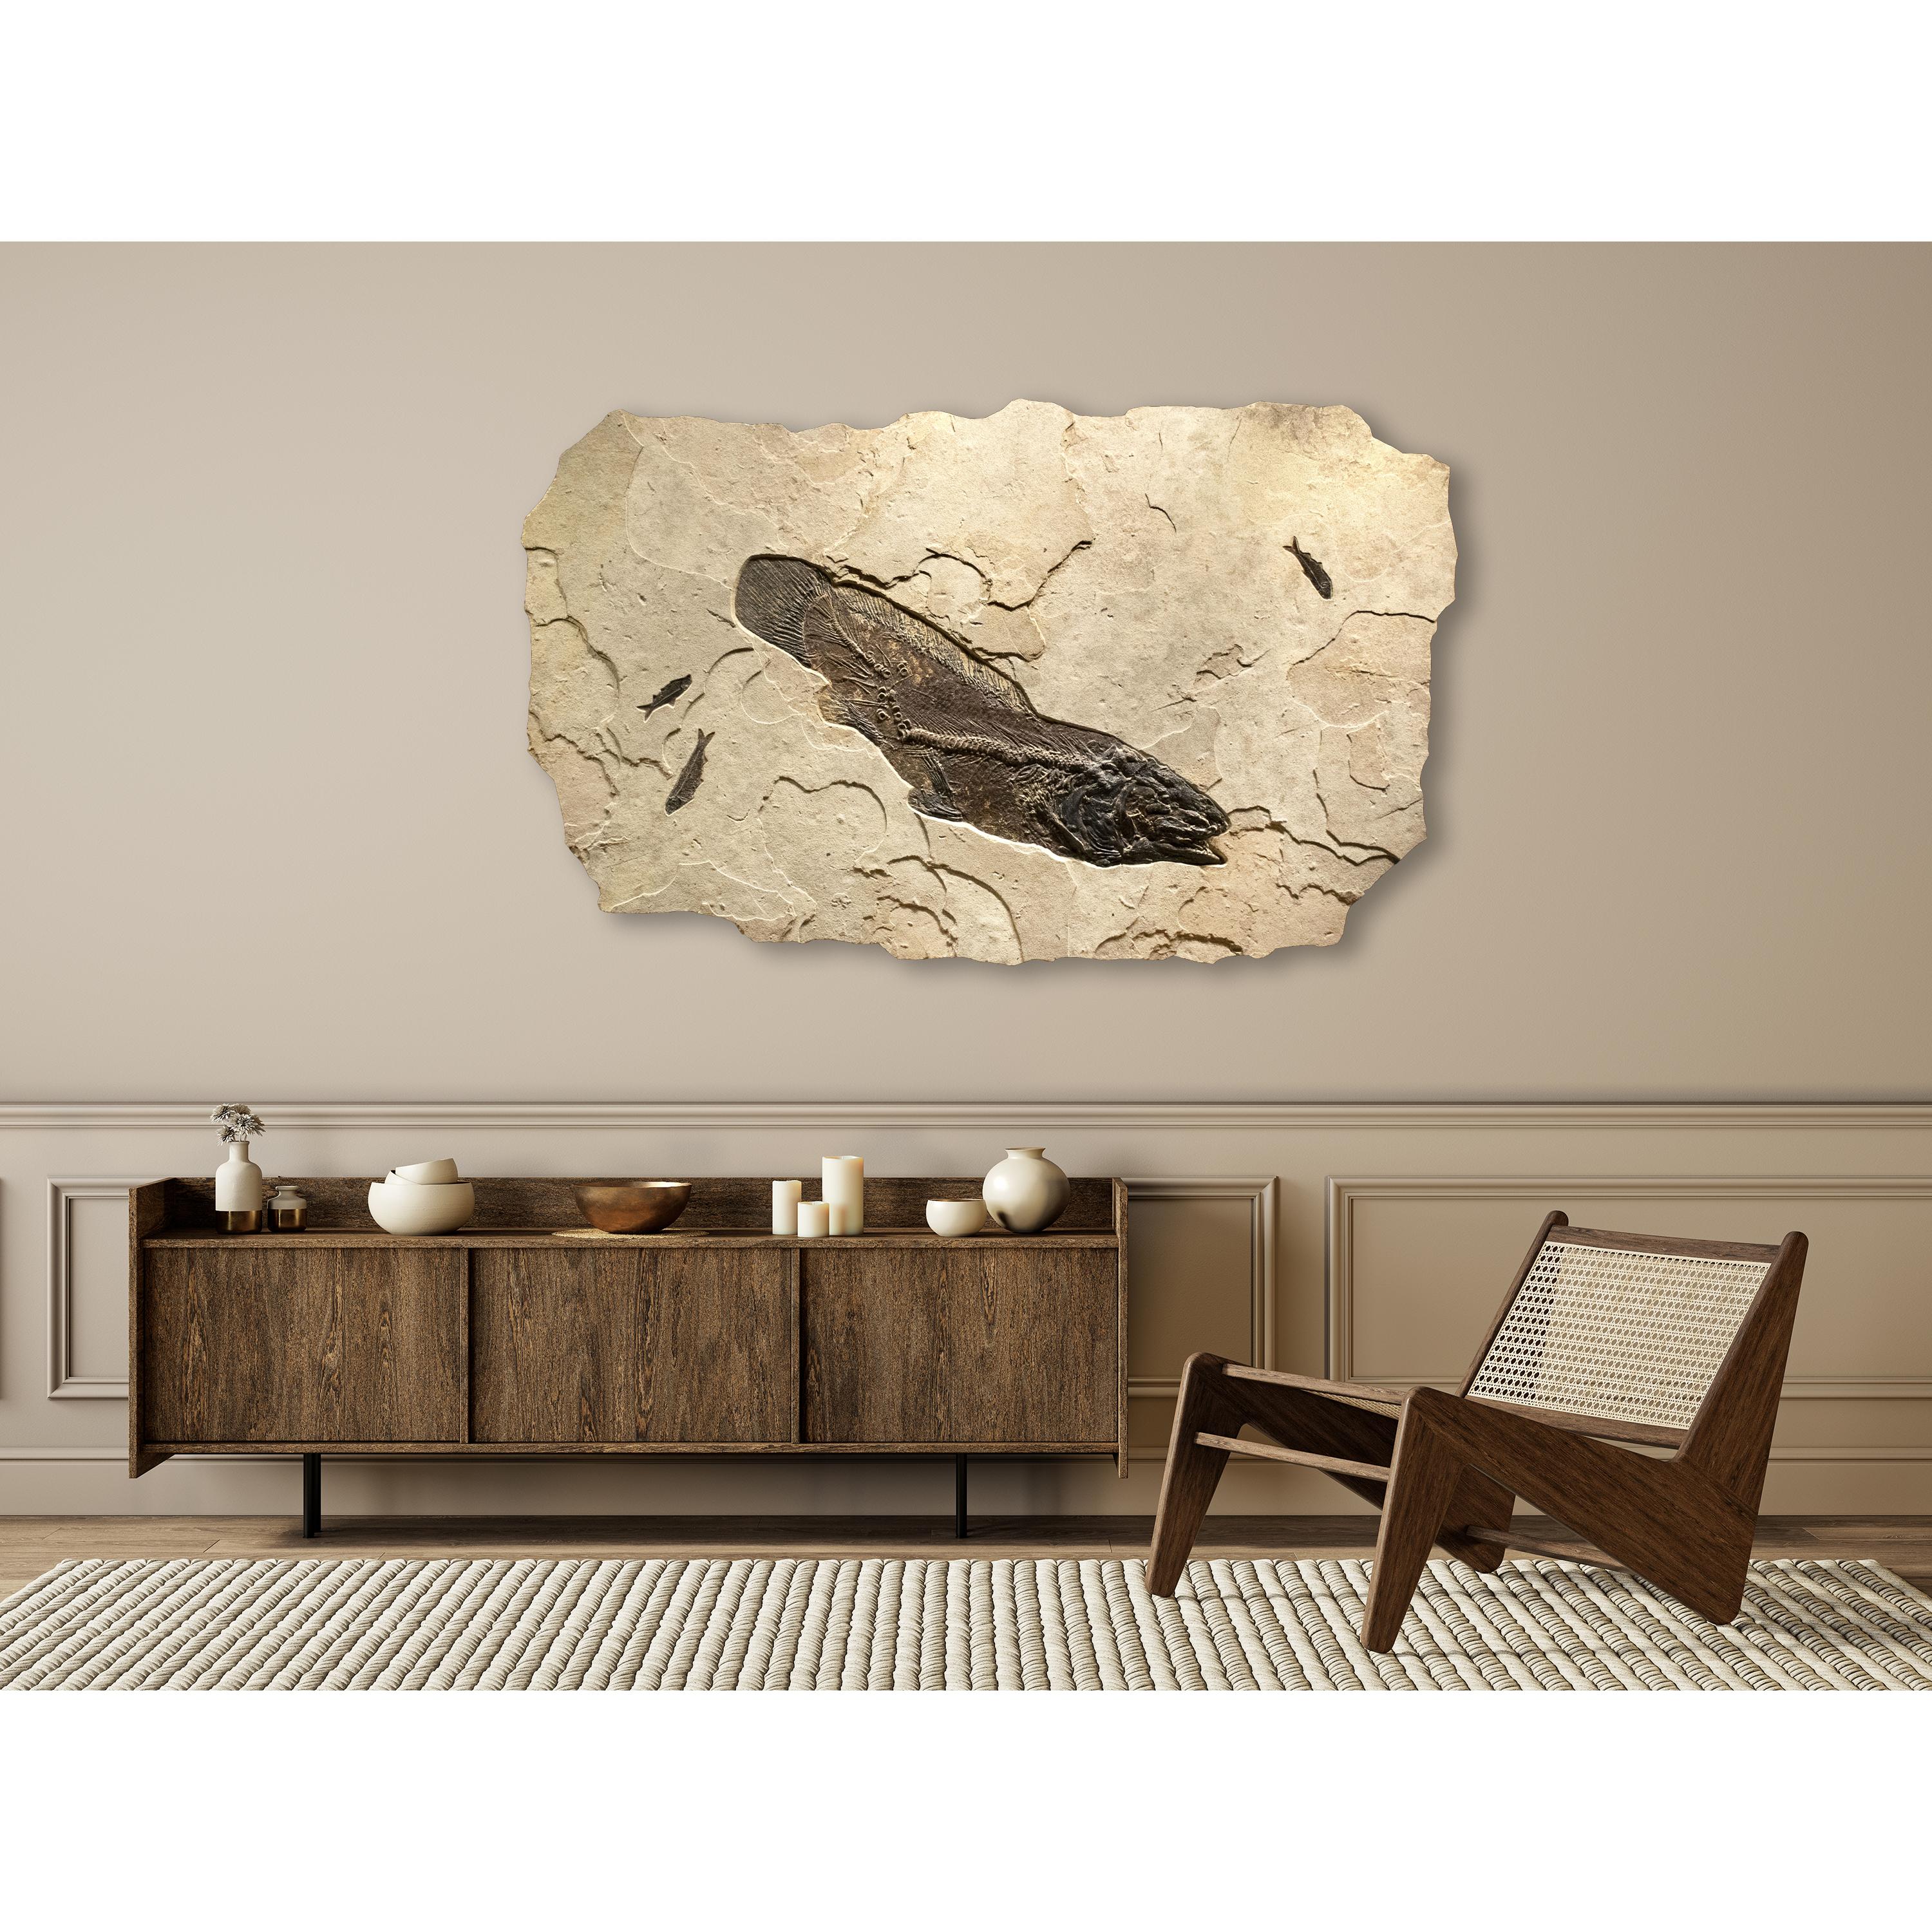 This fossil mural features an Amia pattersoni, an exceptionally rare Eocene era fossil fish dating back about 50 million years. This ancient fish has a remarkable degree of preservation, showcasing highly detailed scale pattern above the vertebral